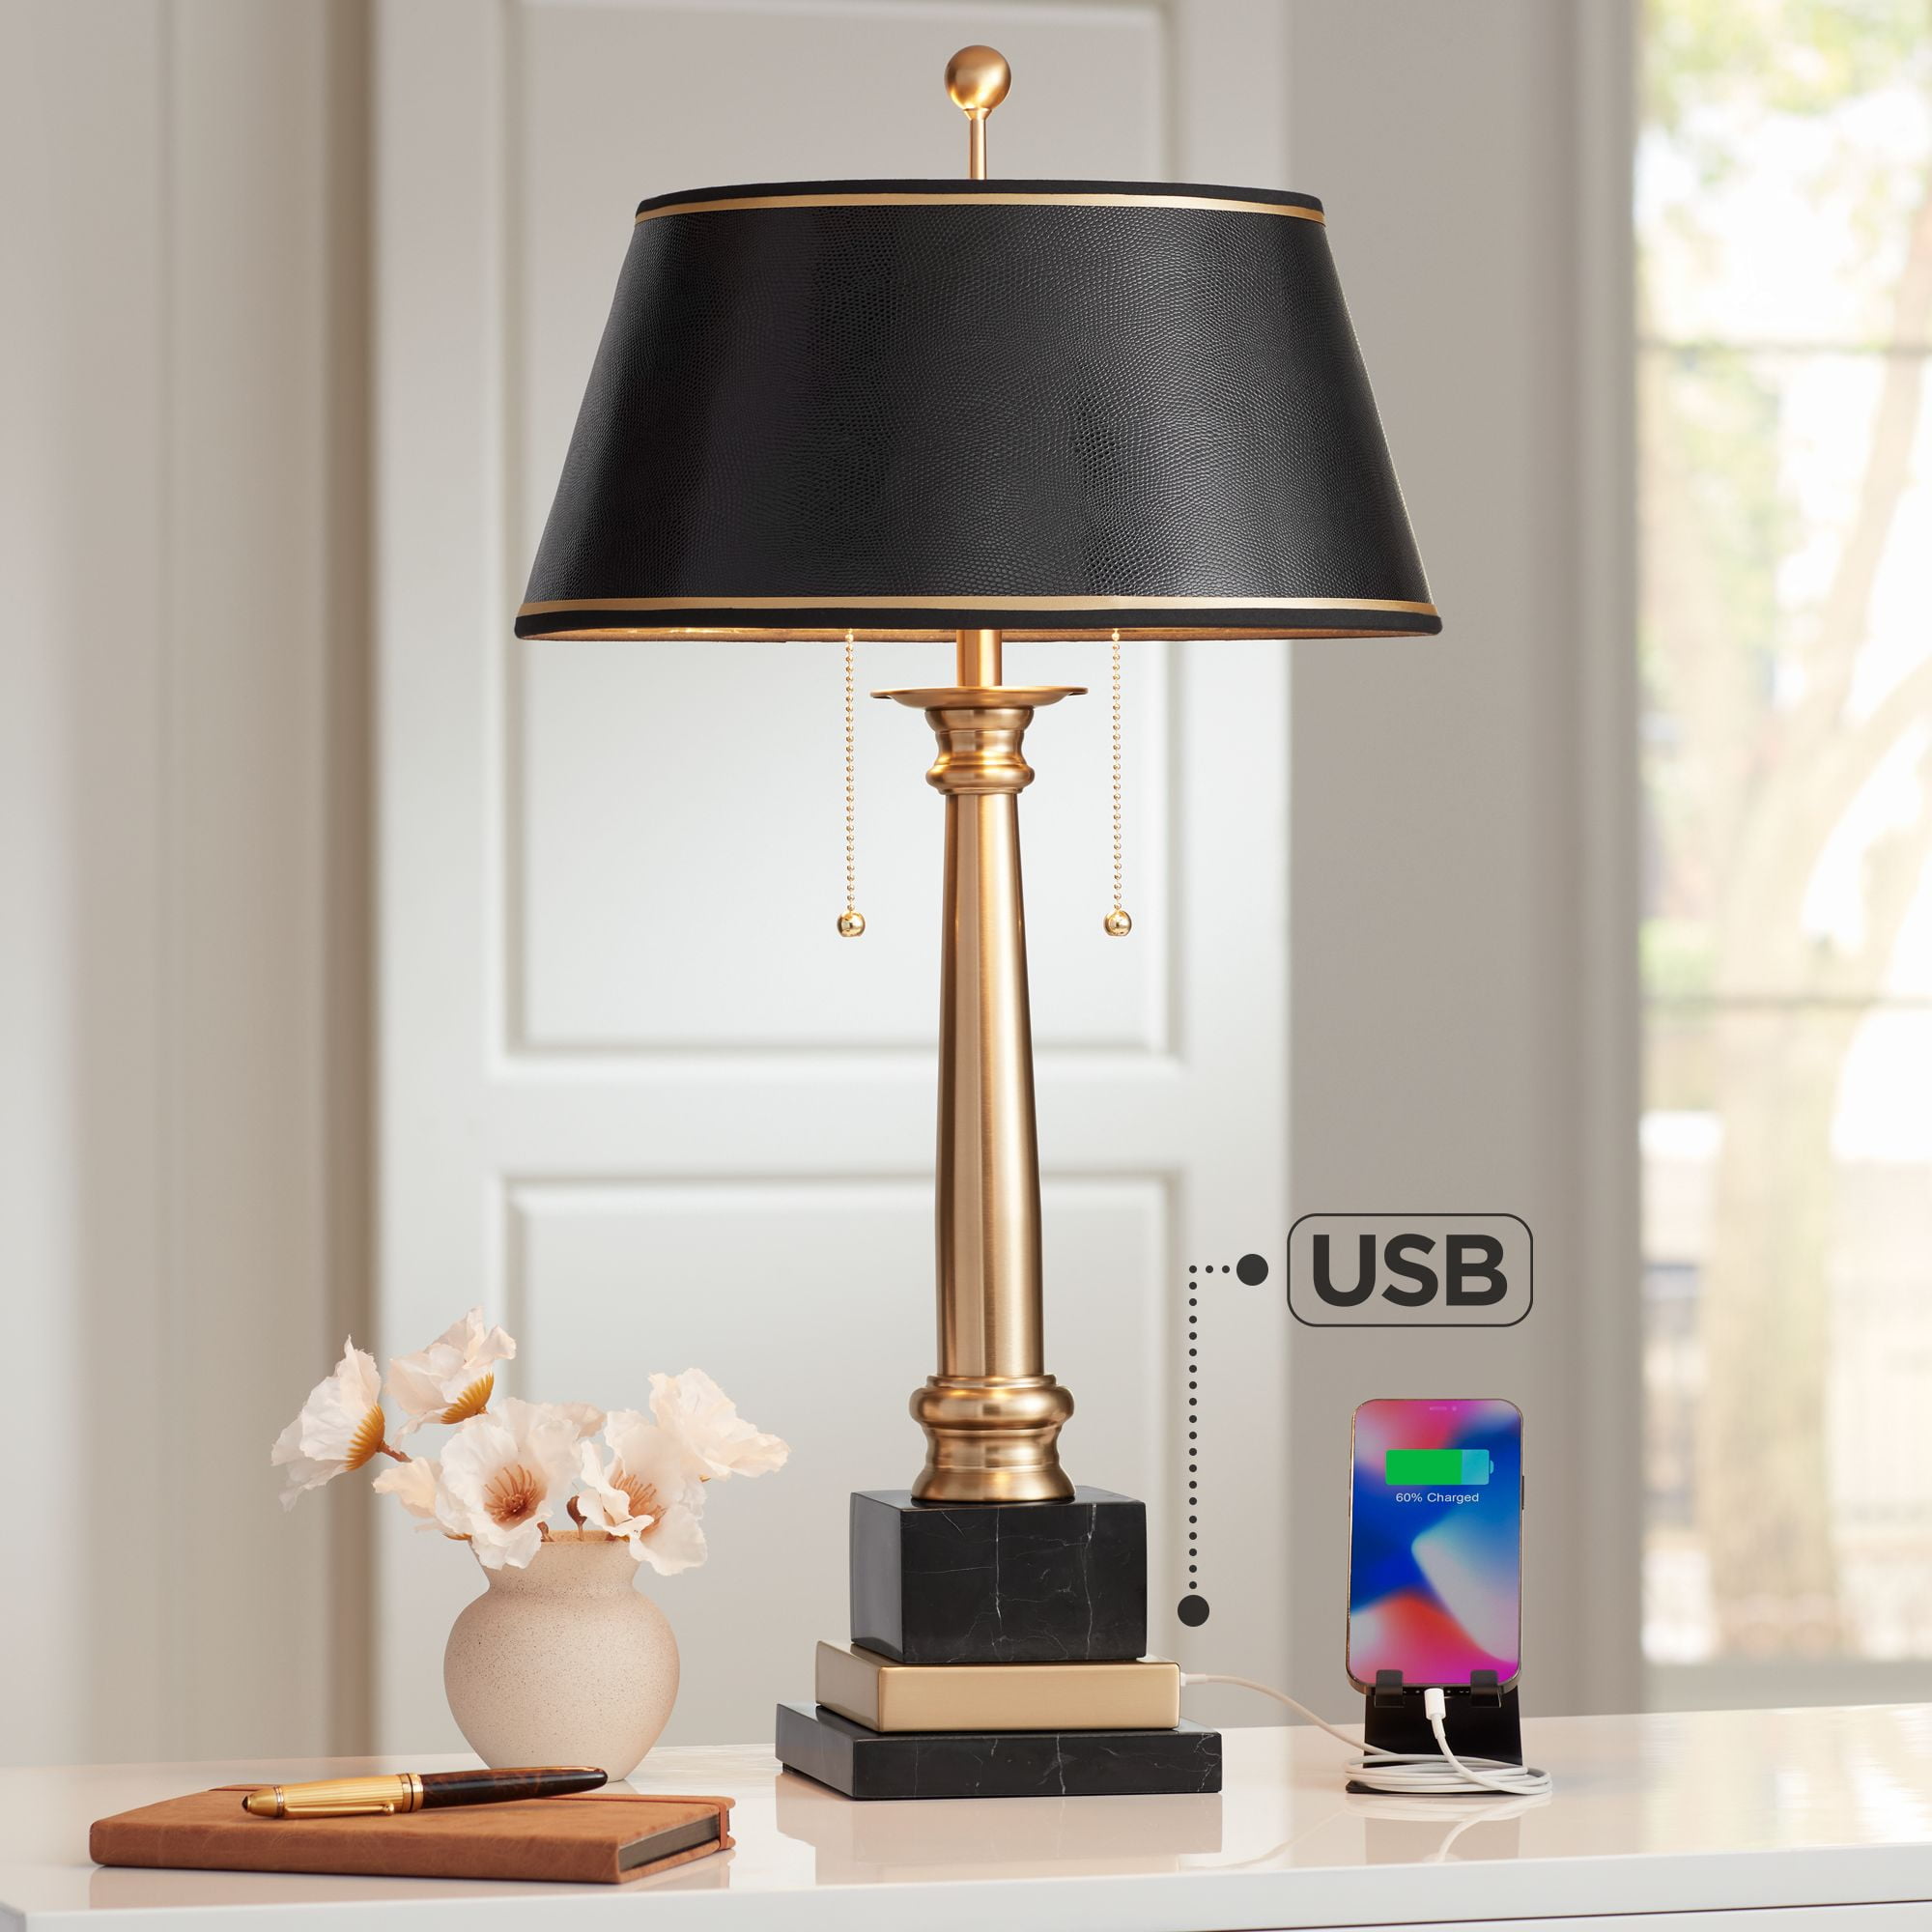 Barnes and Ivy Georgetown Traditional Desk Lamp 28 1/2 Tall Warm Brass  with USB Charging Port Black Shade for Bedroom Living Room Bedside Office  Kids